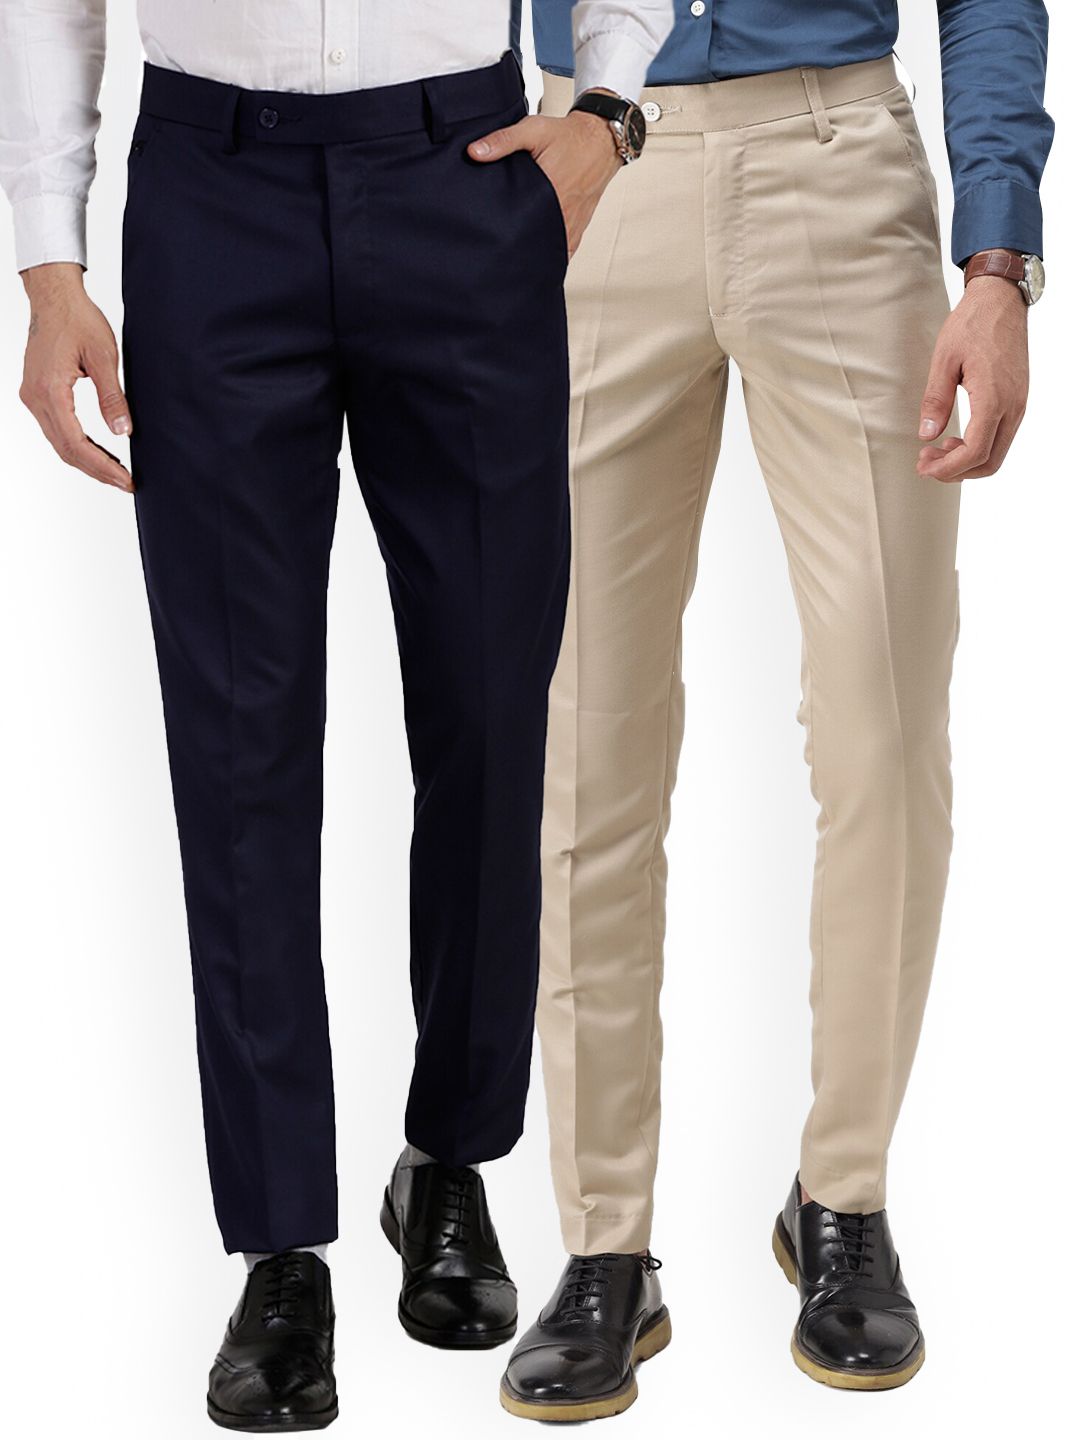 Royal Blue Mid Rise Slim Fit Trousers|105467201